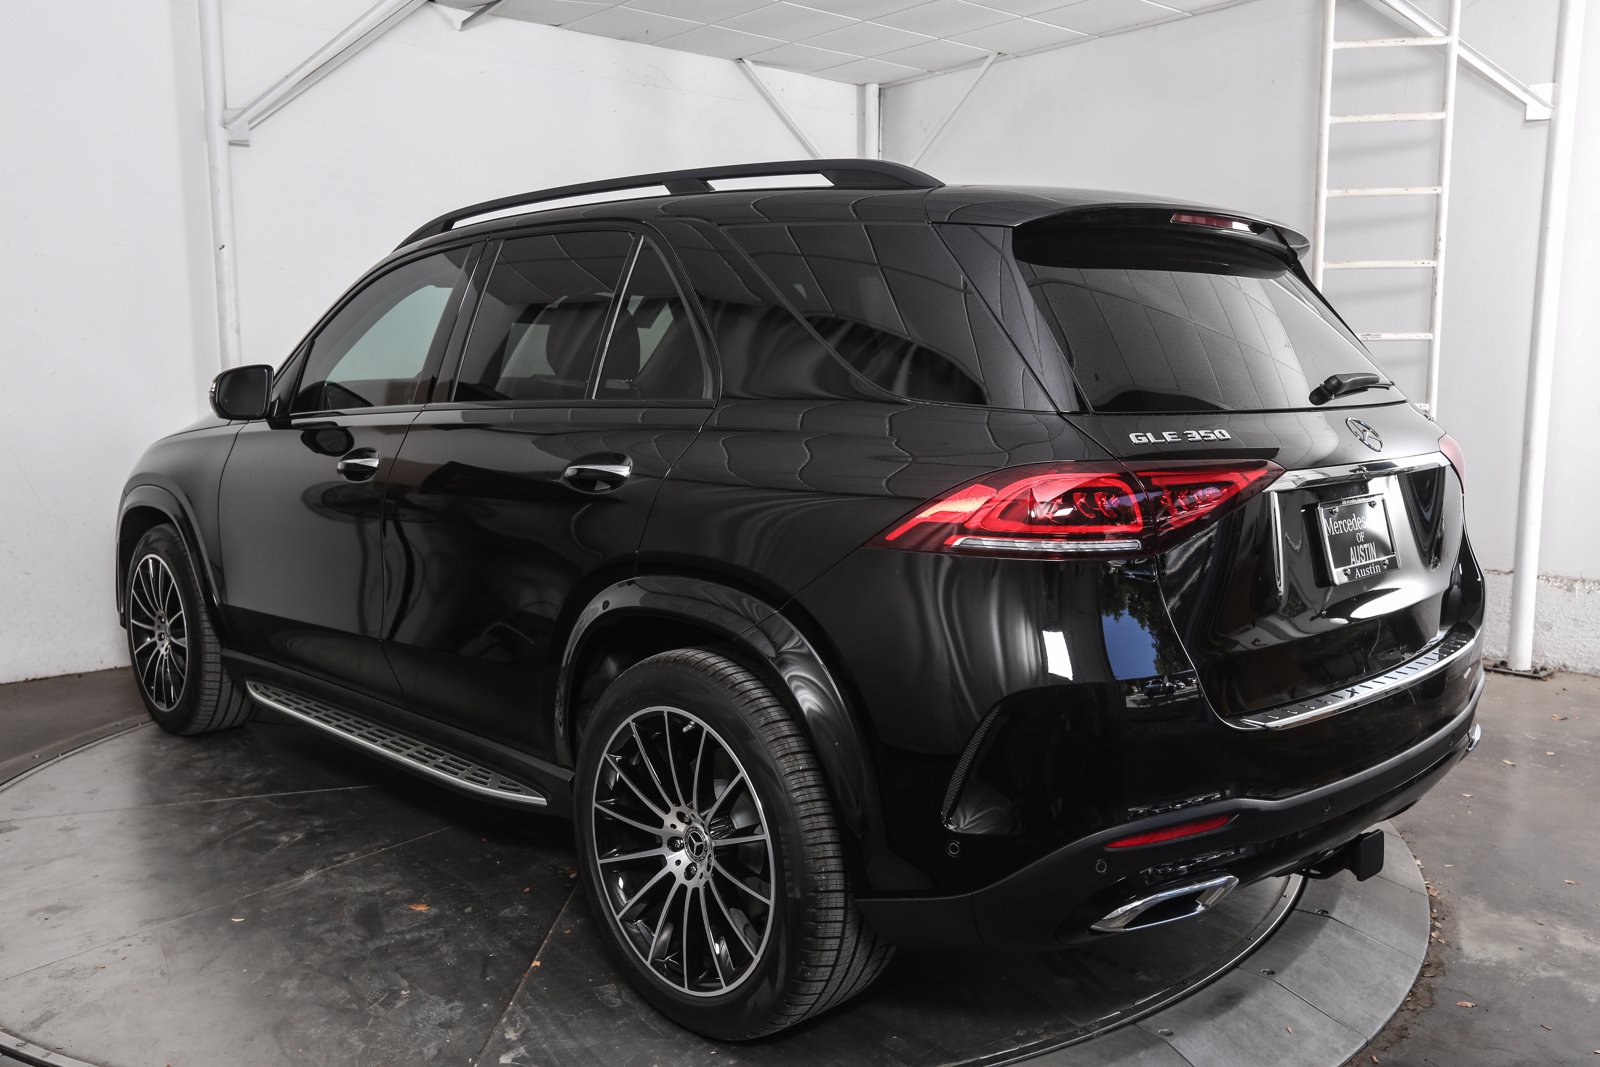 New 2020 Mercedes Benz GLE GLE 350 4D Sport Utility in M61523 